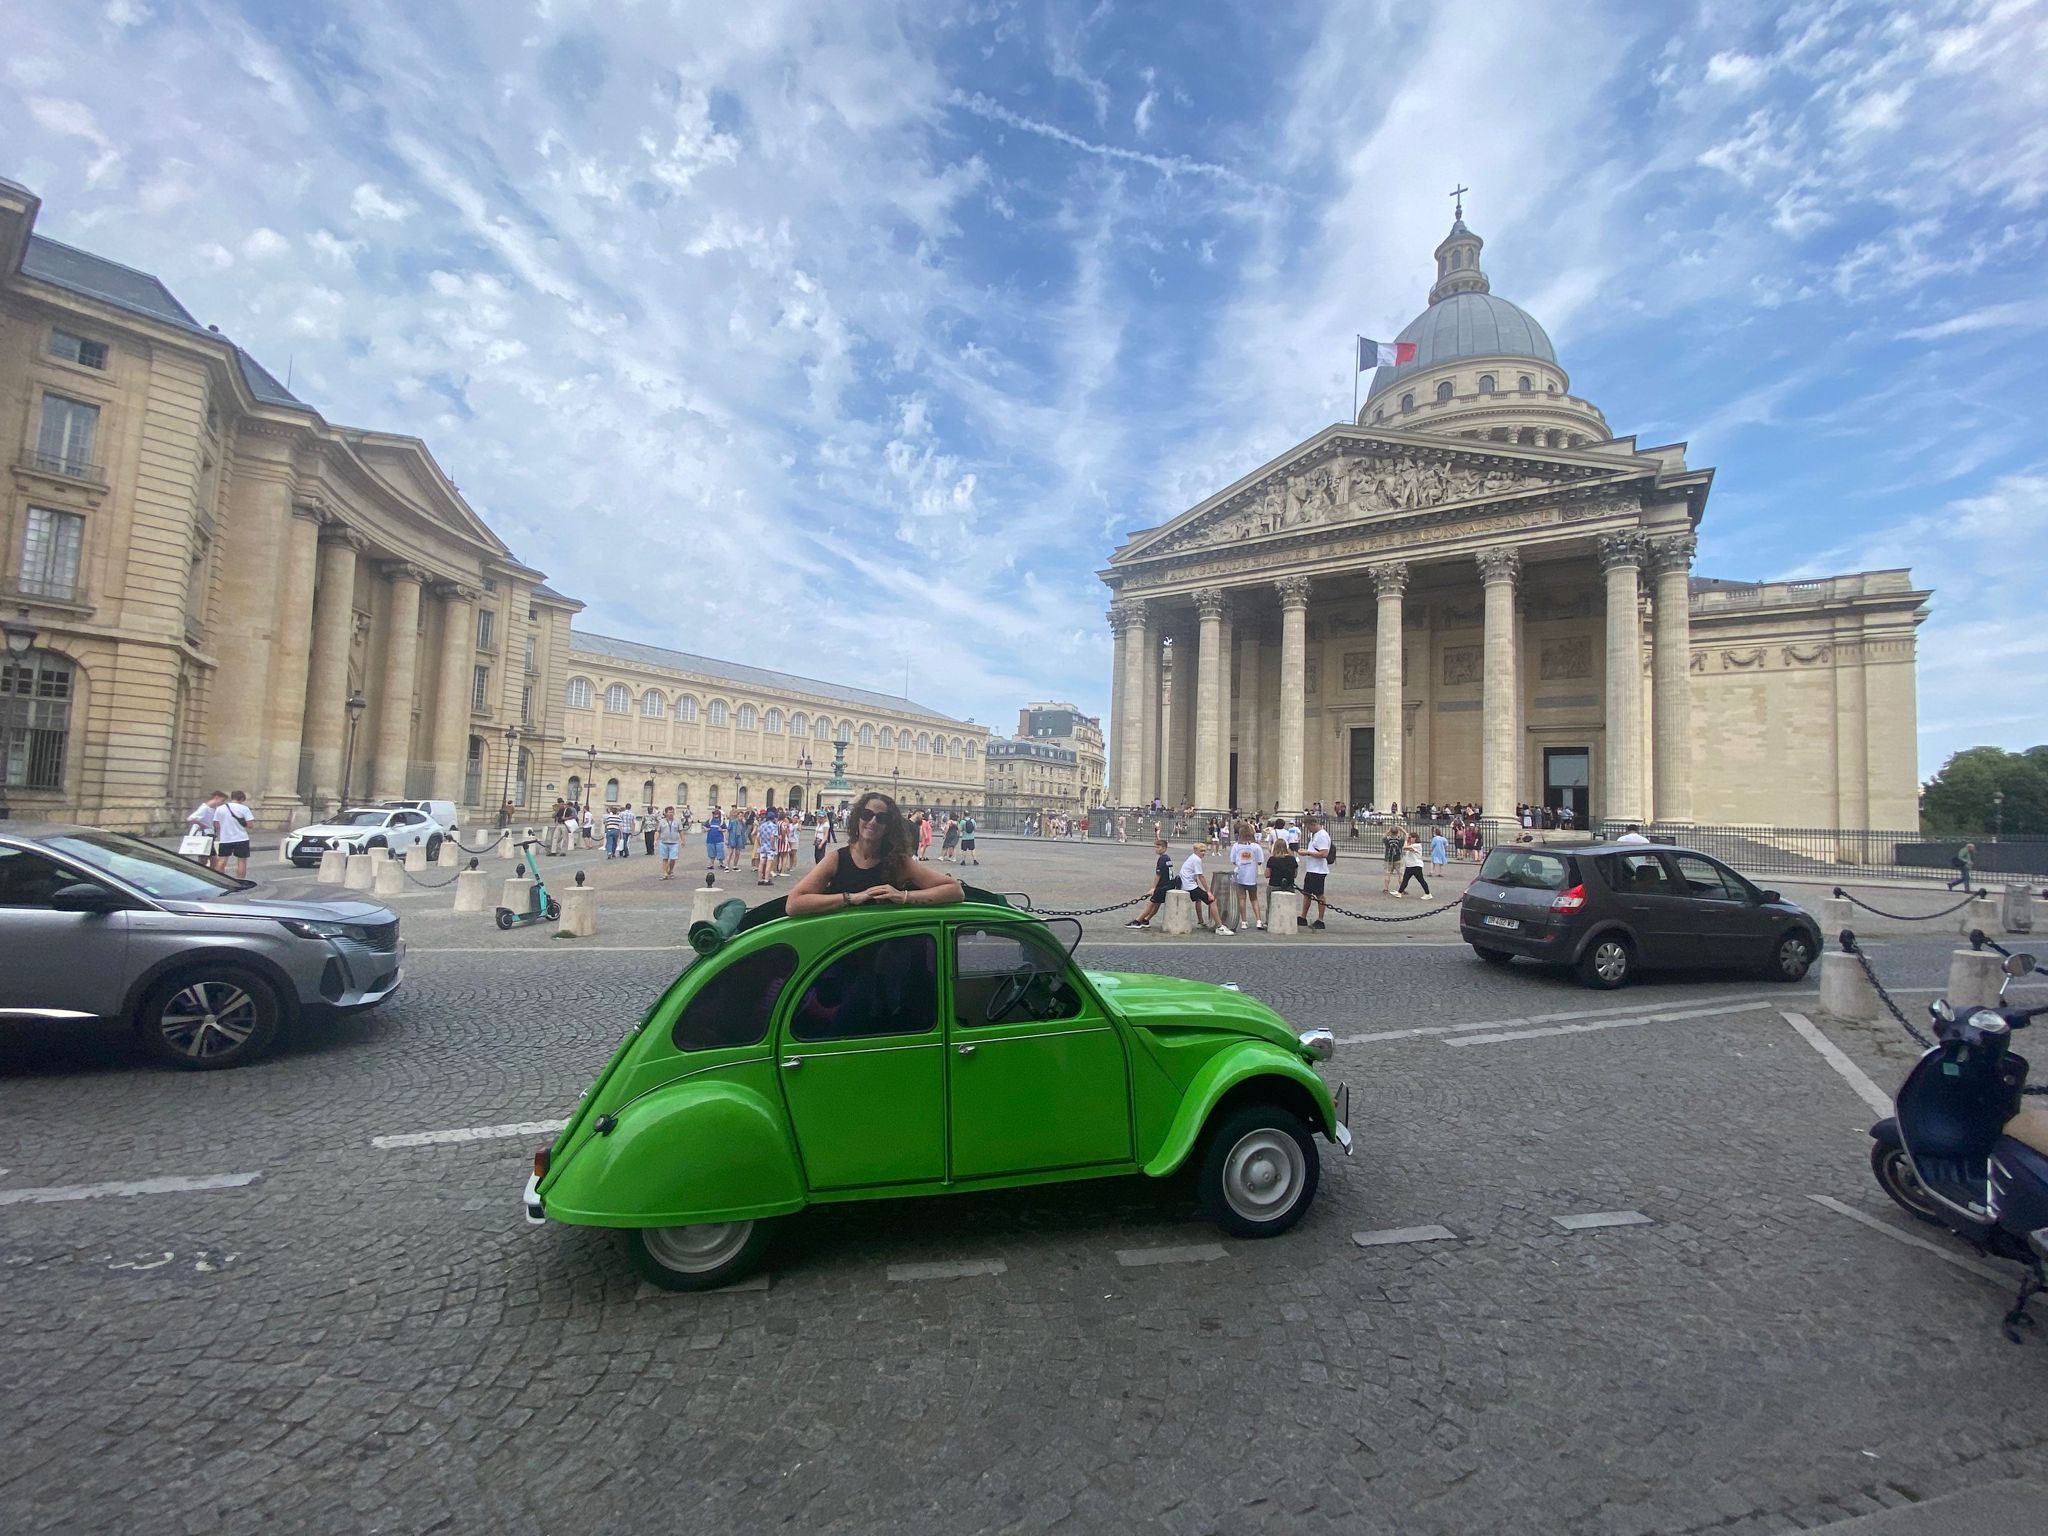 🗼 Explore Paris in Luxury! 🚗 Discover Iconic Monuments in a Vintage Citroën!